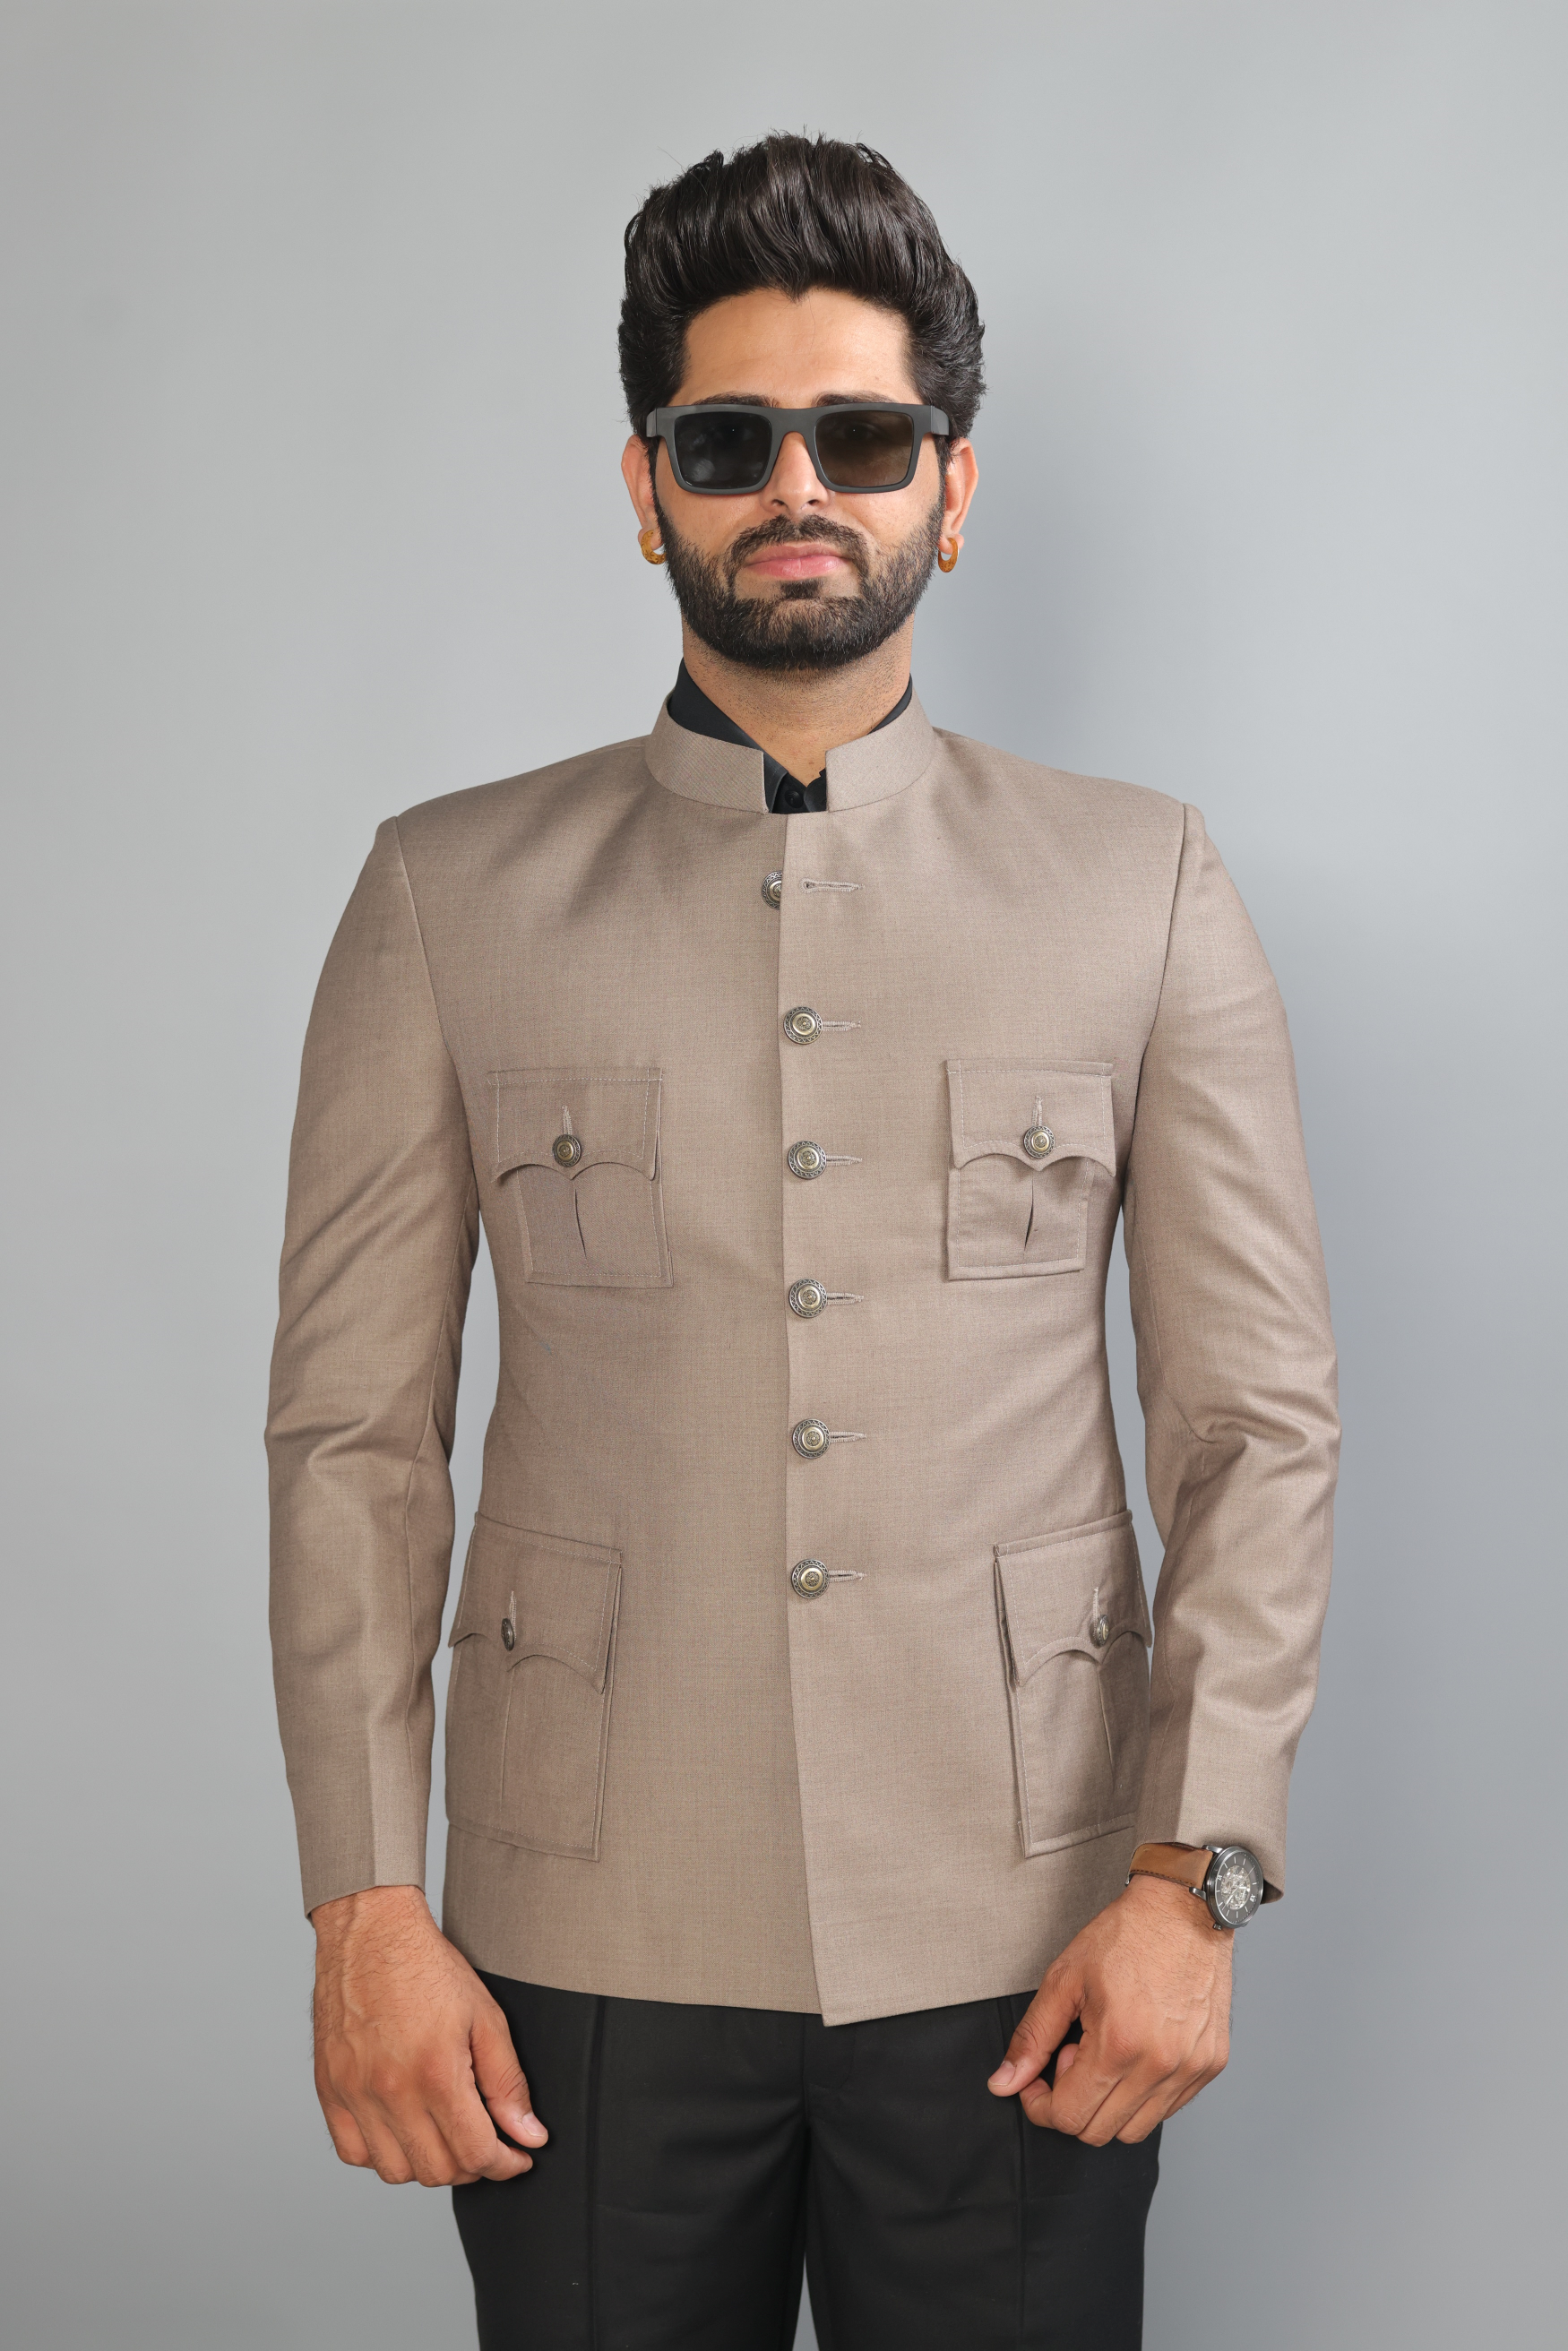 Exclusive Mink Brown  4 pocket Hunting Style Jodhpuri Bandh gala with Black Trouser | Elegant Elite Styling | Perfect for Family Weddings Formal Parties Ring Ceremony